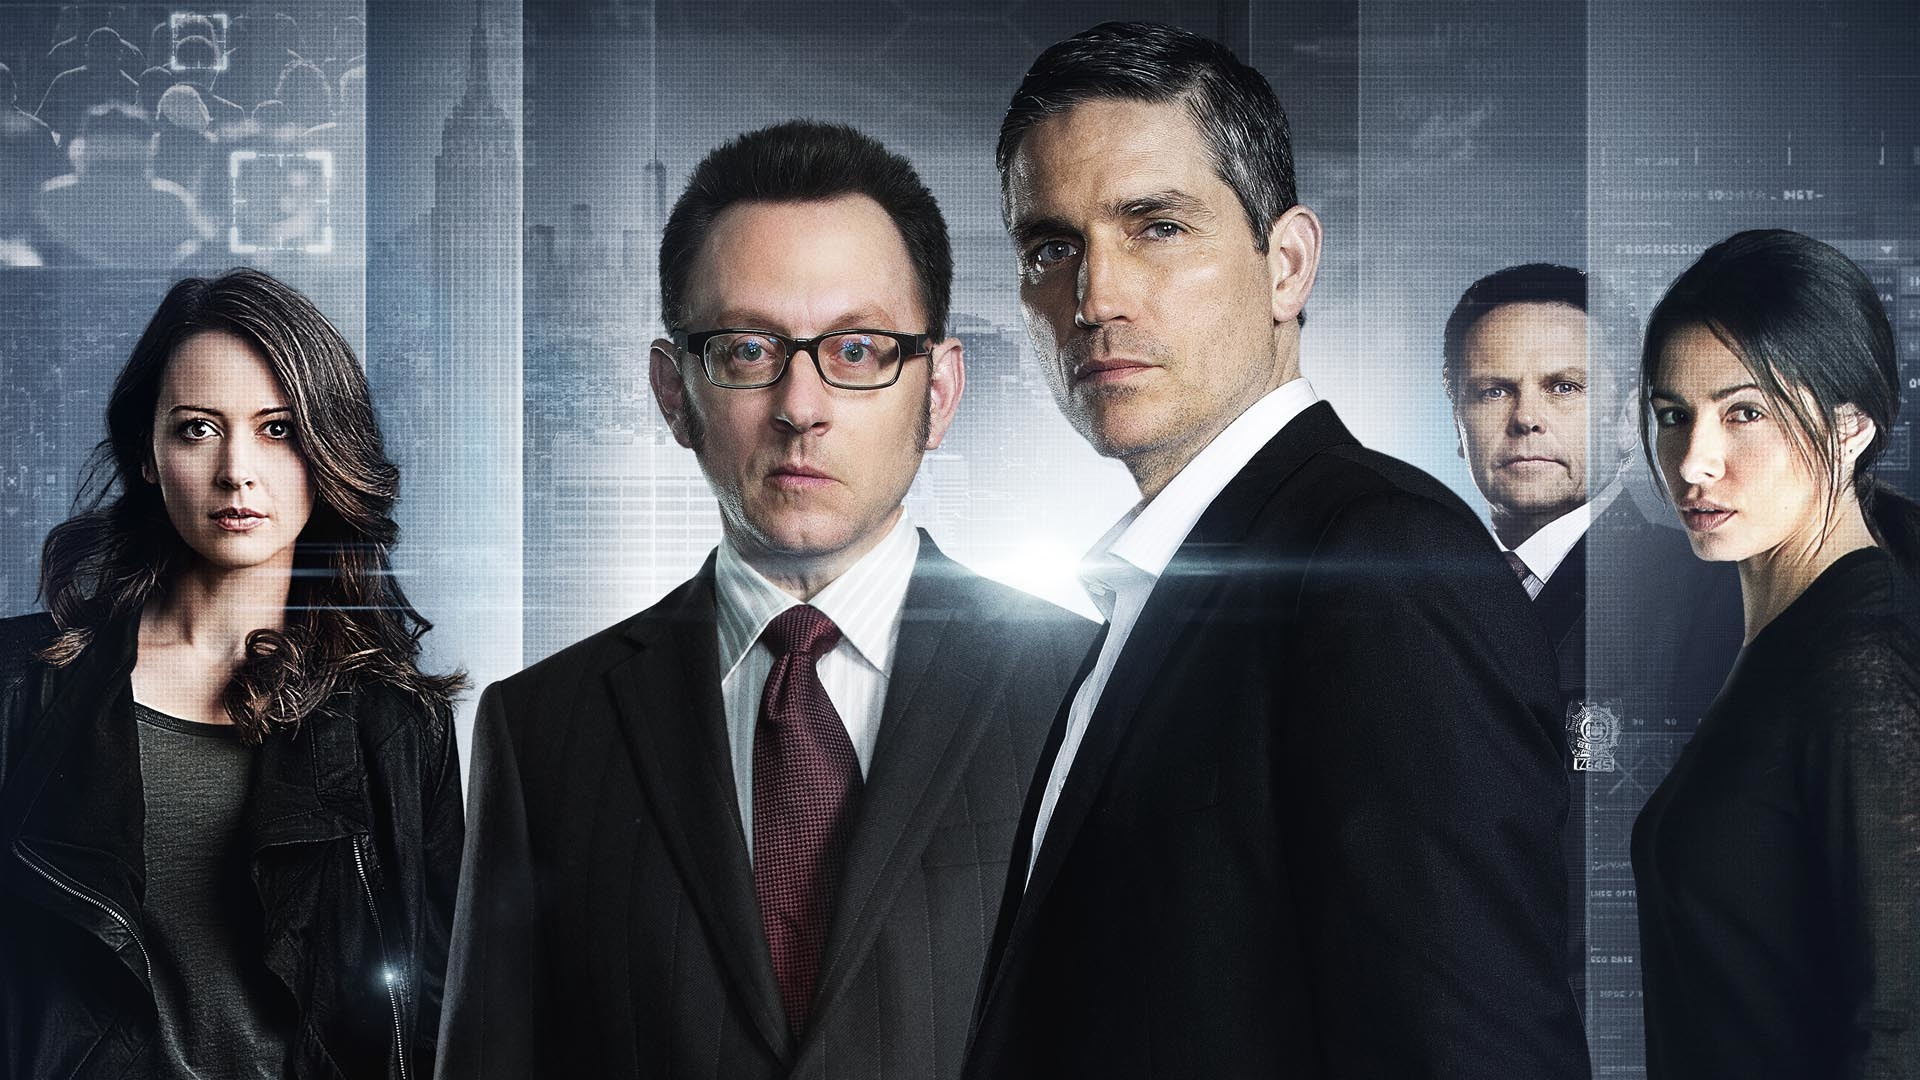 Show Person of Interest